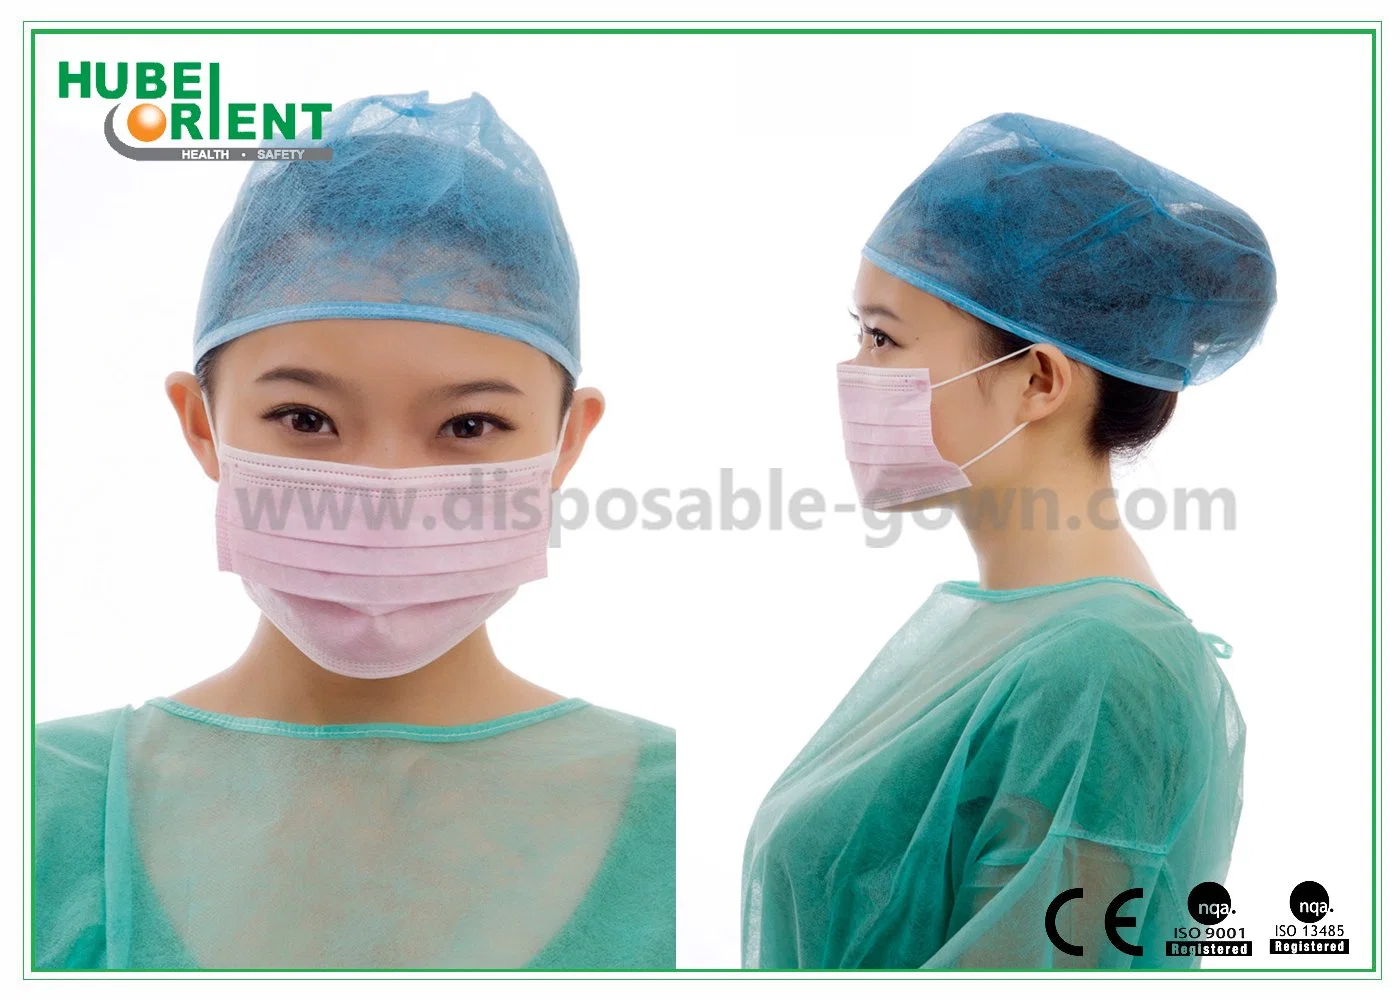 Disposable Daily Use Medical Non-Woven Face Mask with Earloop Hospital Use Surgical Face Mask